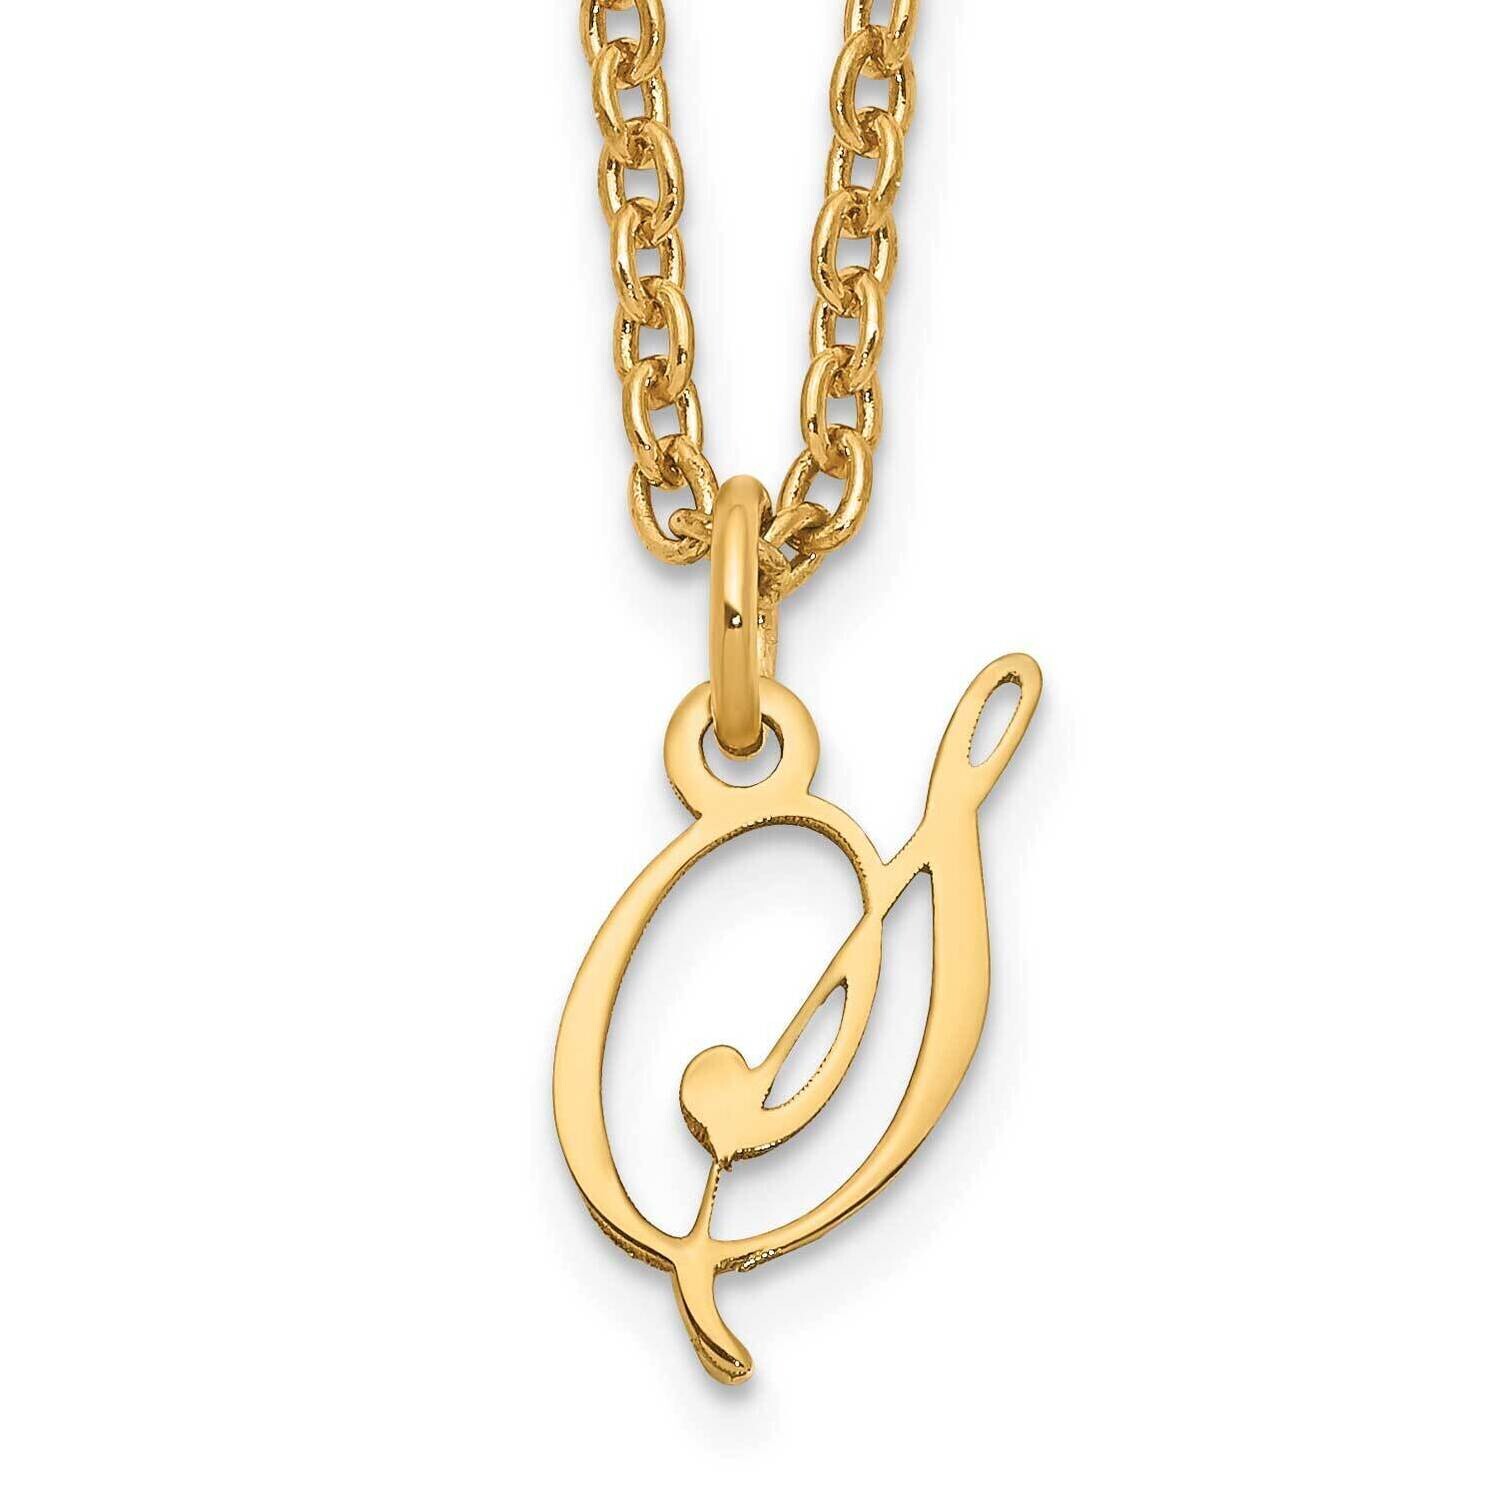 Gold-Plated Letter S Initial Necklace Sterling Silver XNA756GP/S